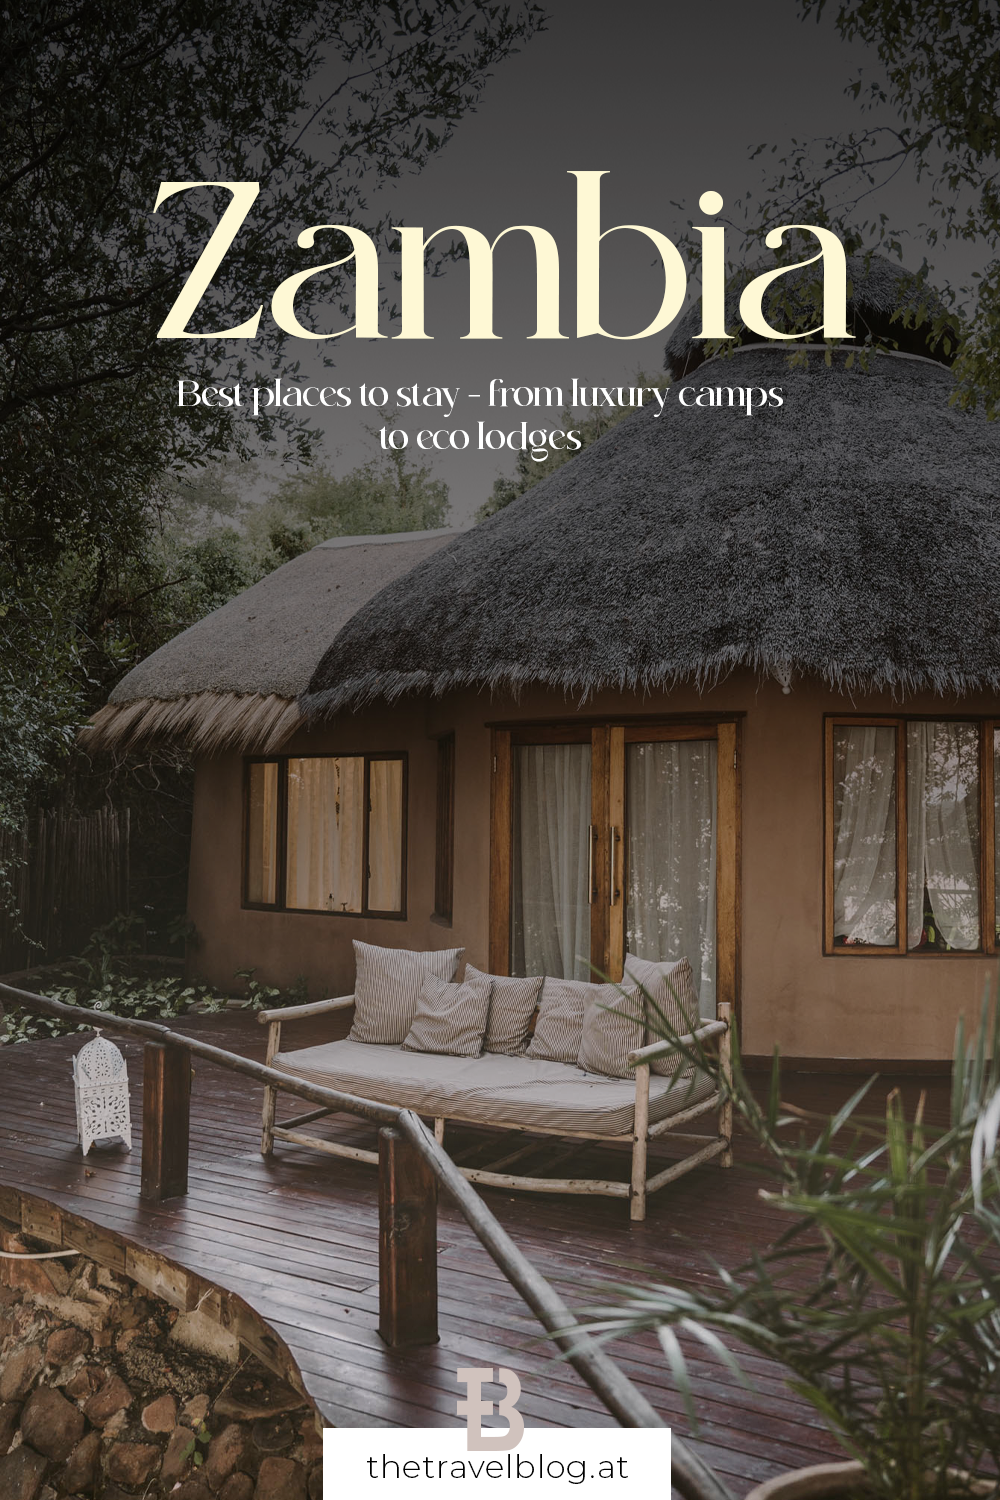 Where to stay in Zambia: From eco camps to luxury lodges